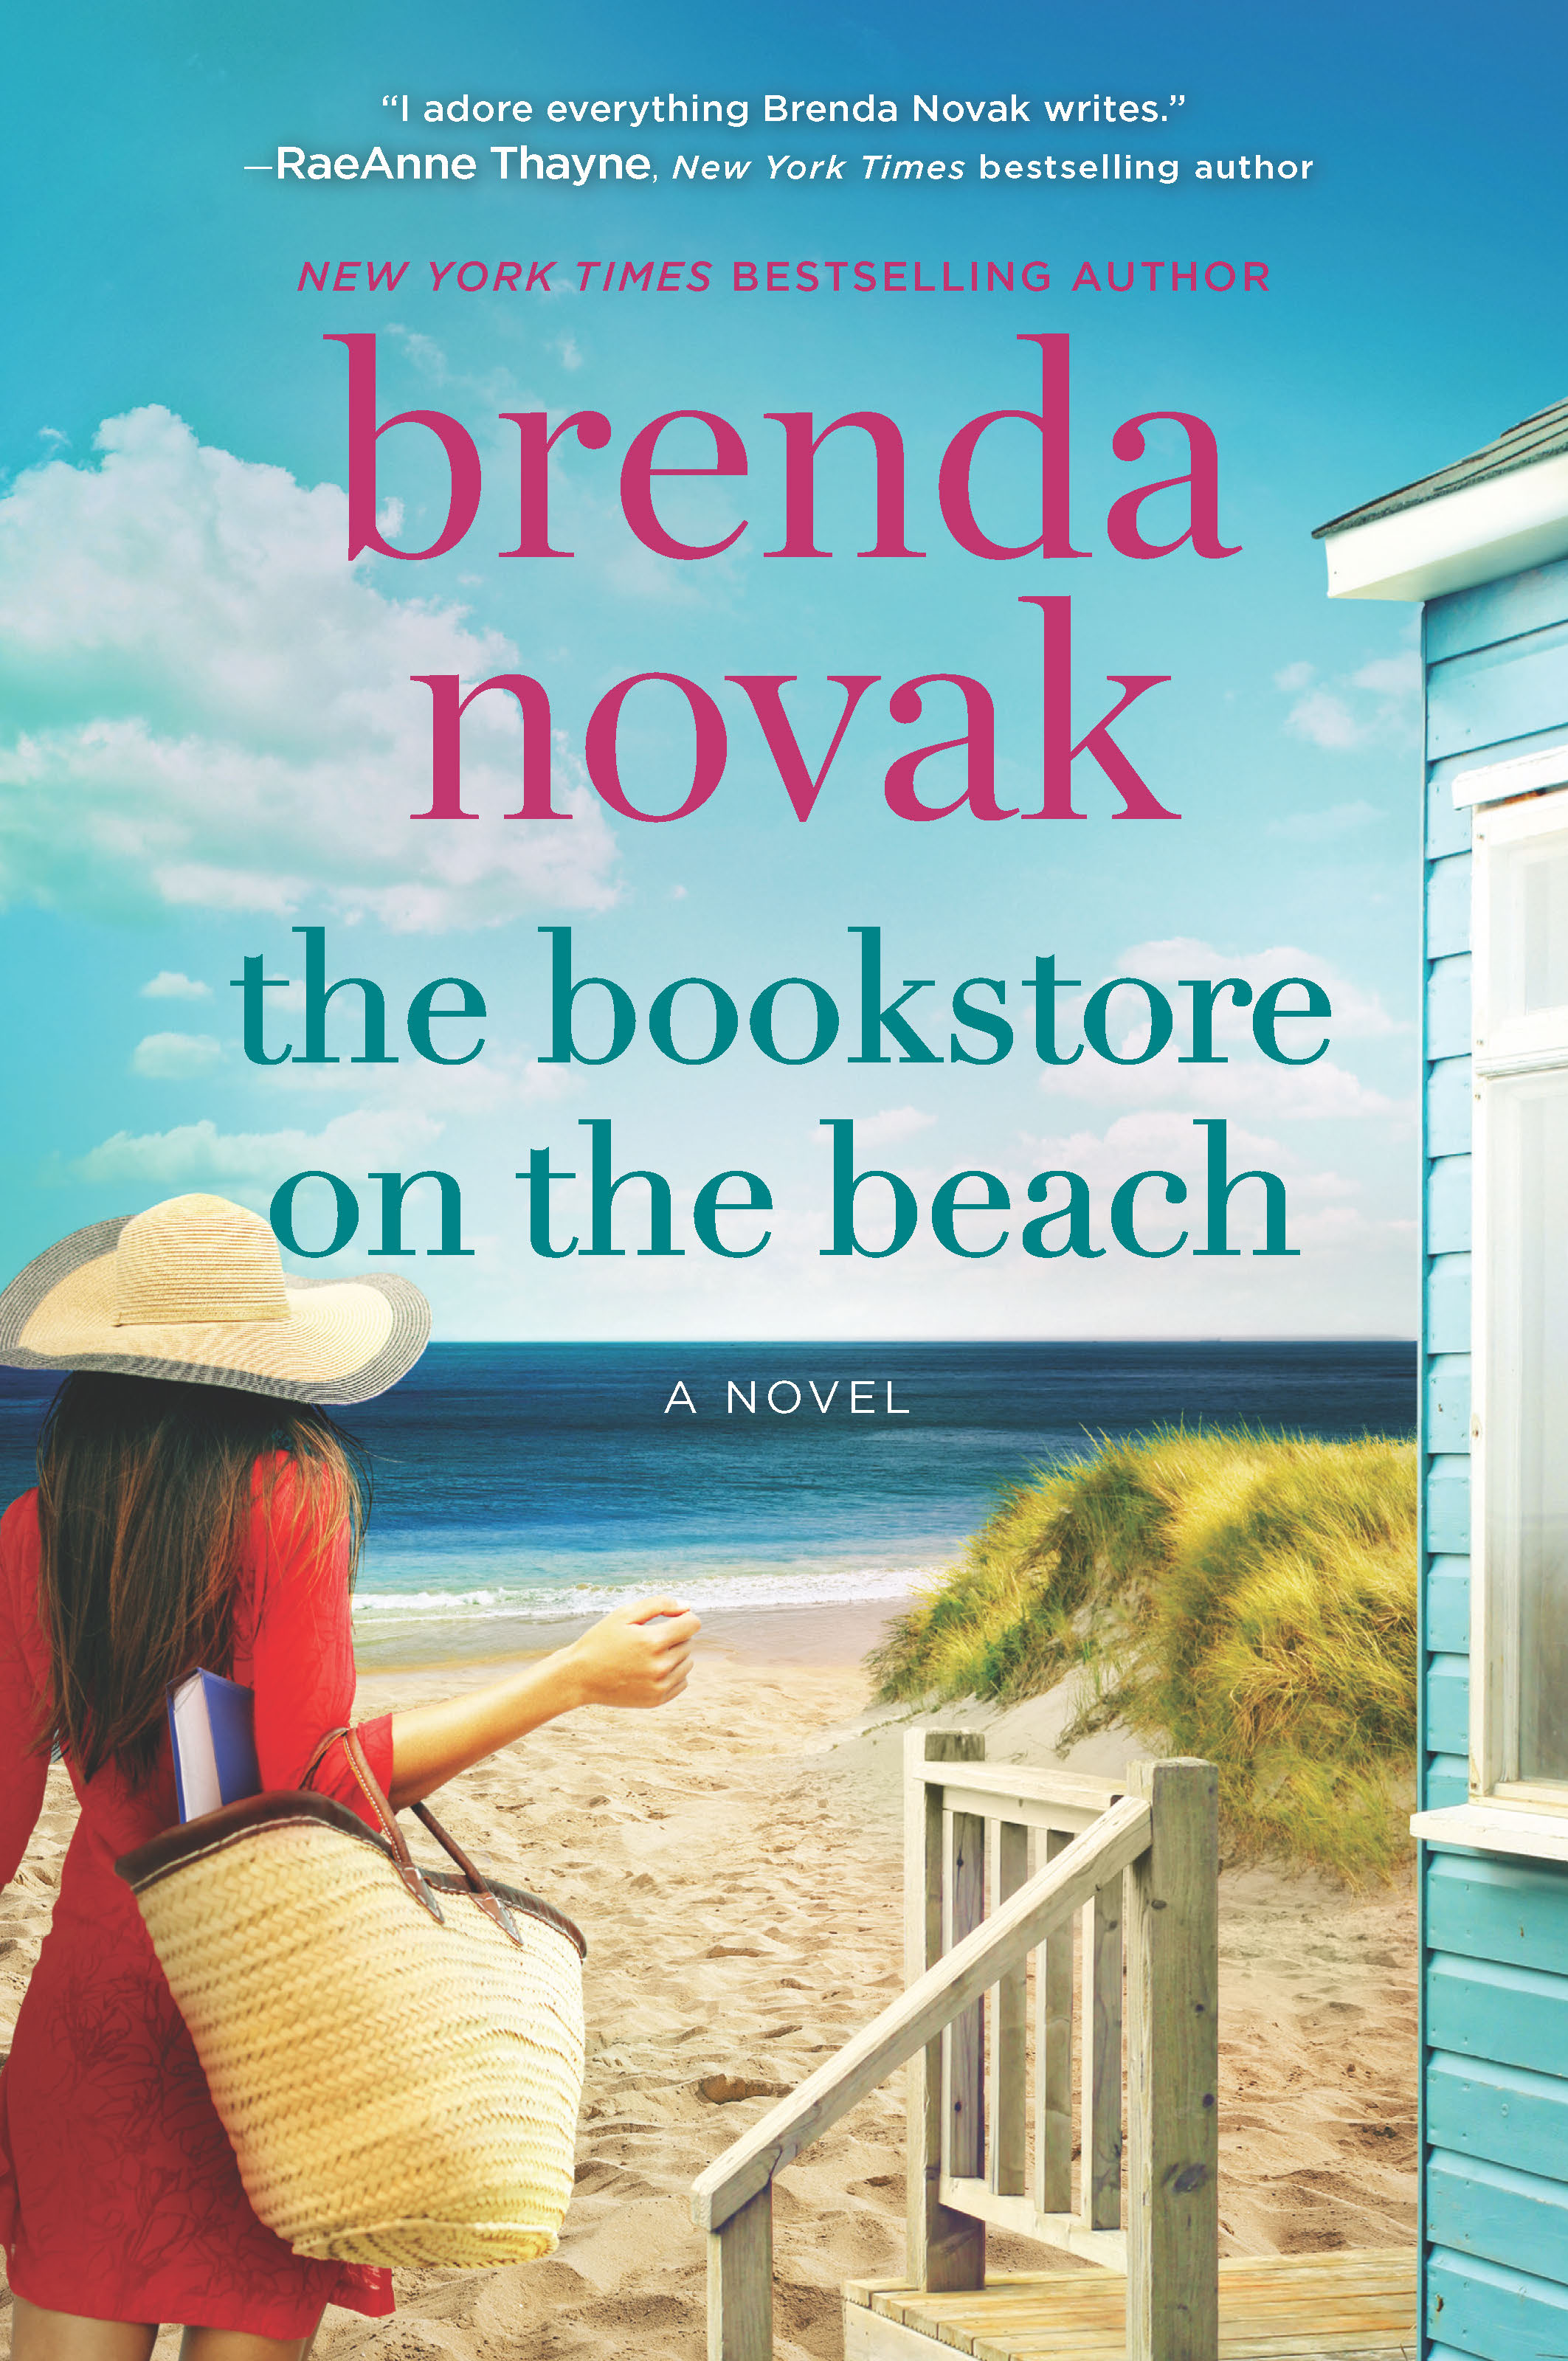 Review: The Bookstore on the Beach by Brenda Novak